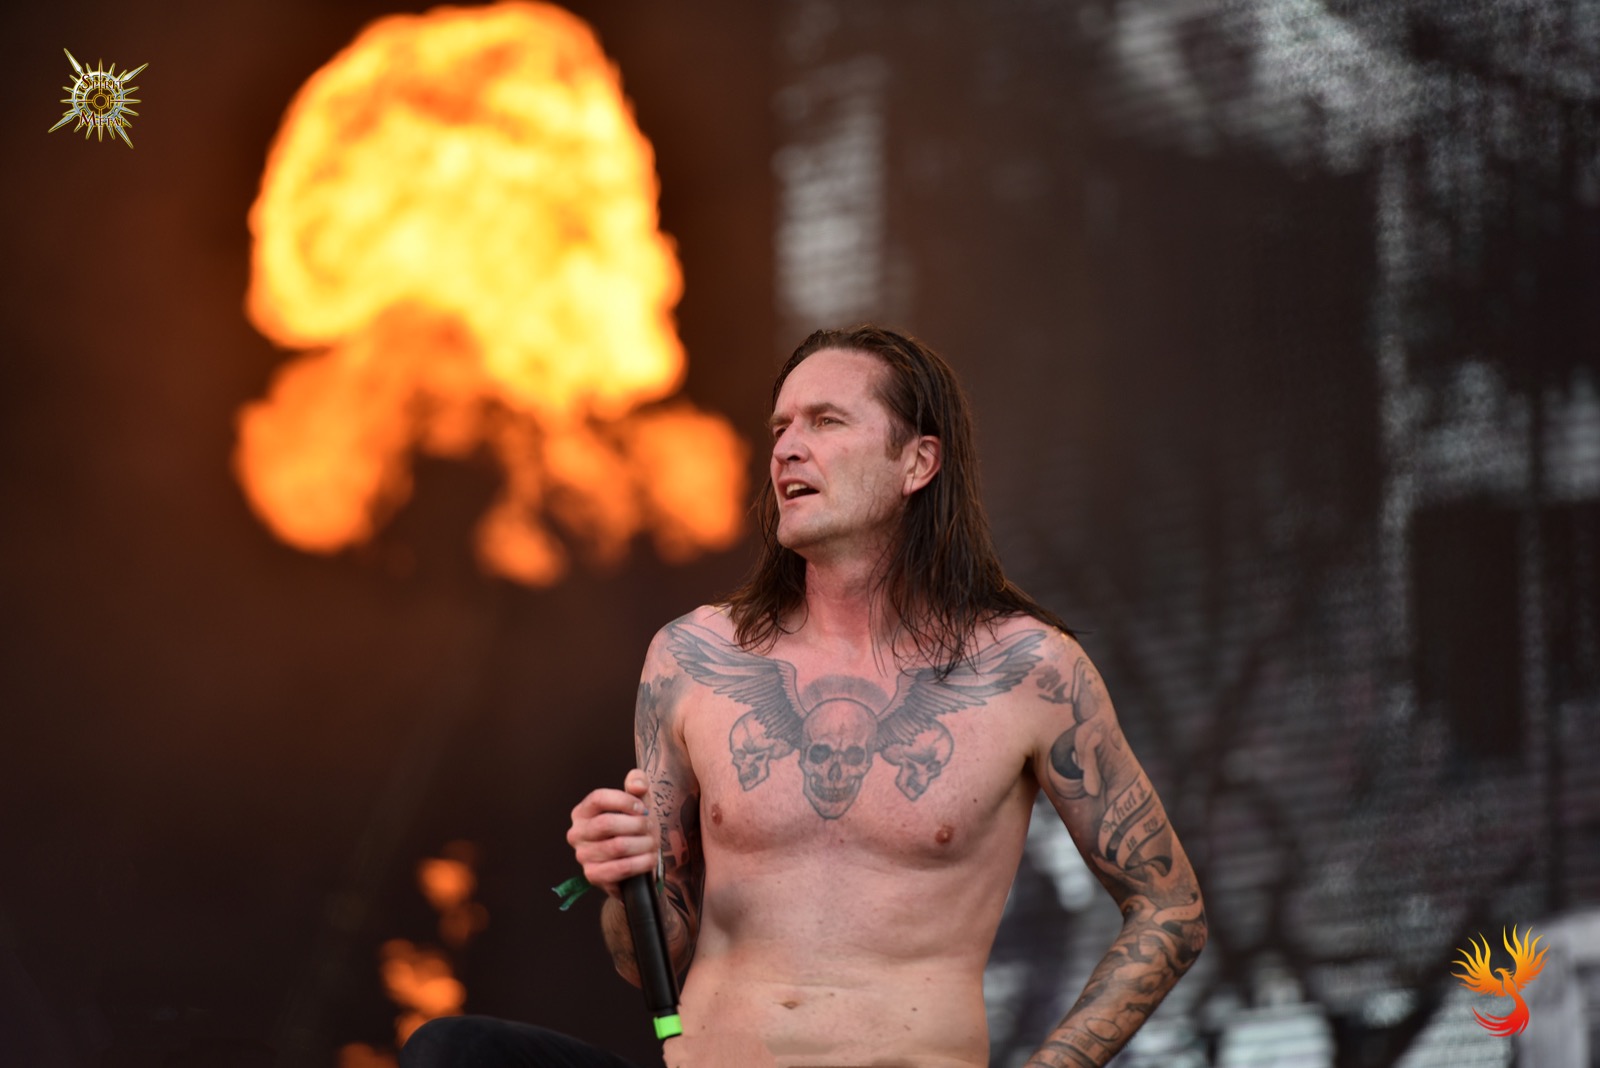 Heaven Shall Burn - discography, line-up, biography, interviews, photos